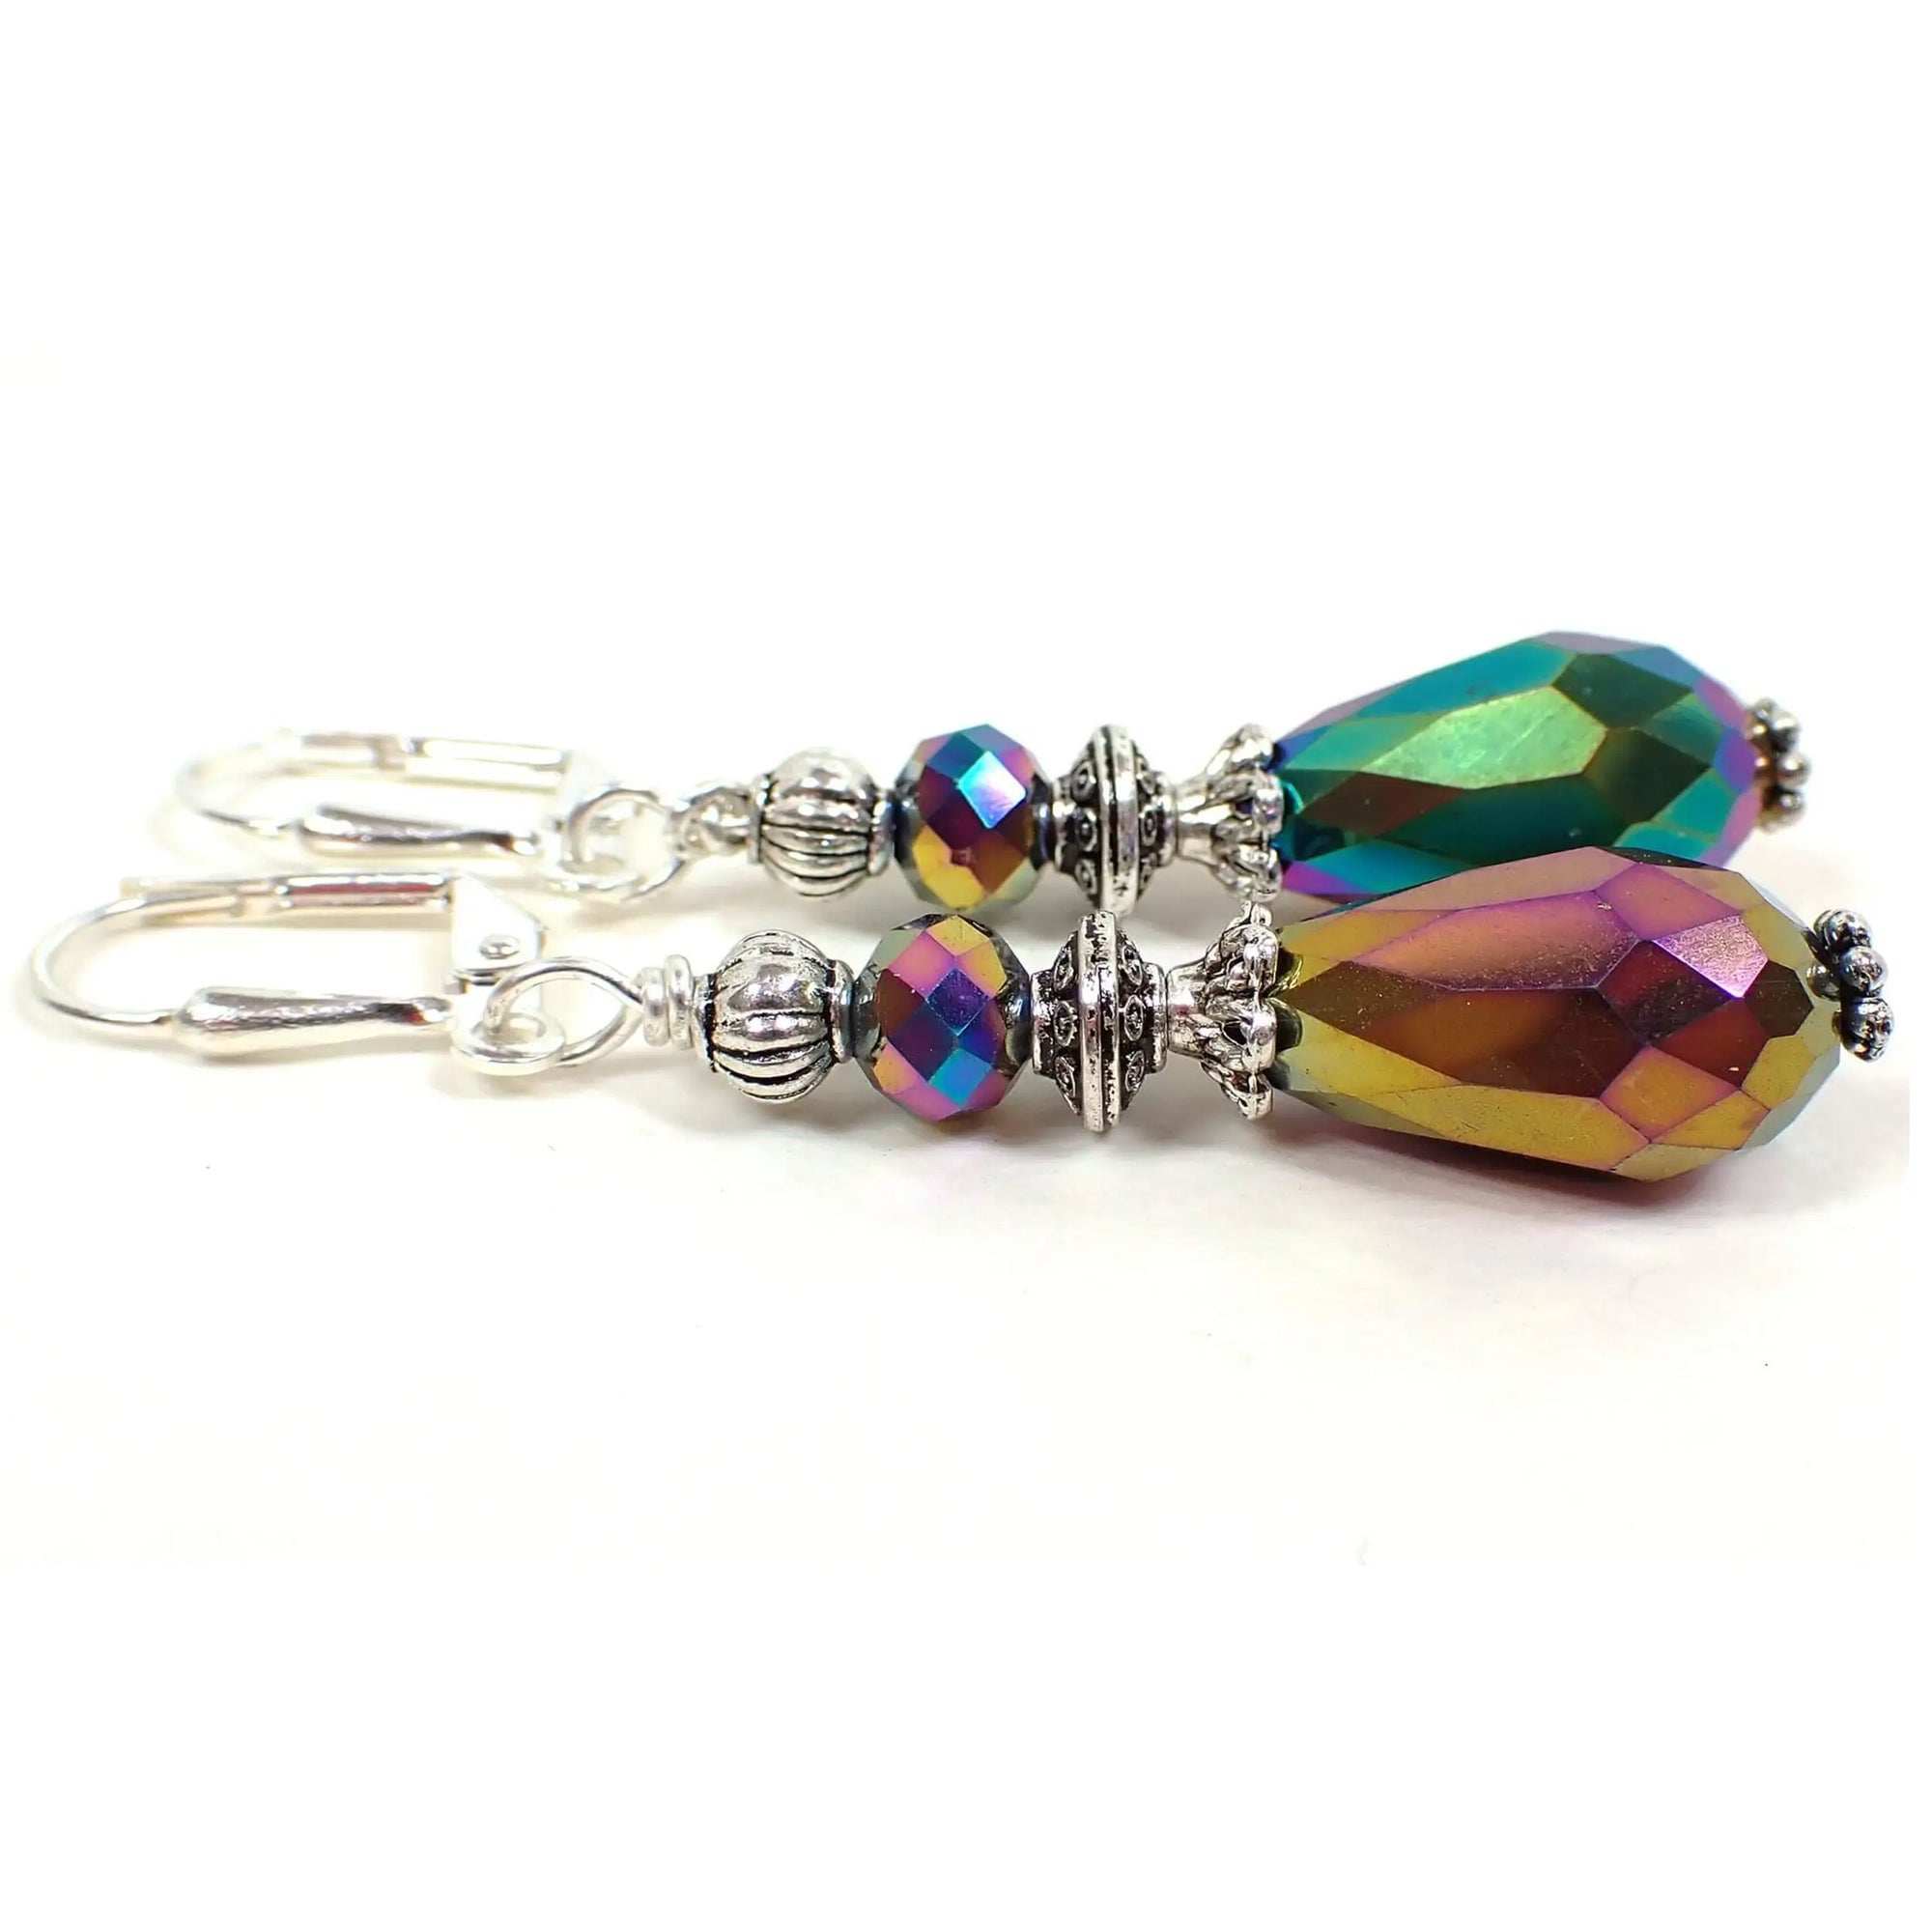 Side view of the handmade metallic rainbow earrings. The metal is silver plated in color. There are faceted glass rondelle beads at the top and teardrop beads at the bottom. The beads are coated with a metallic color pattern that has different colors all the way around the beads. There is purple, yellow, blue, pink, green, and orange.